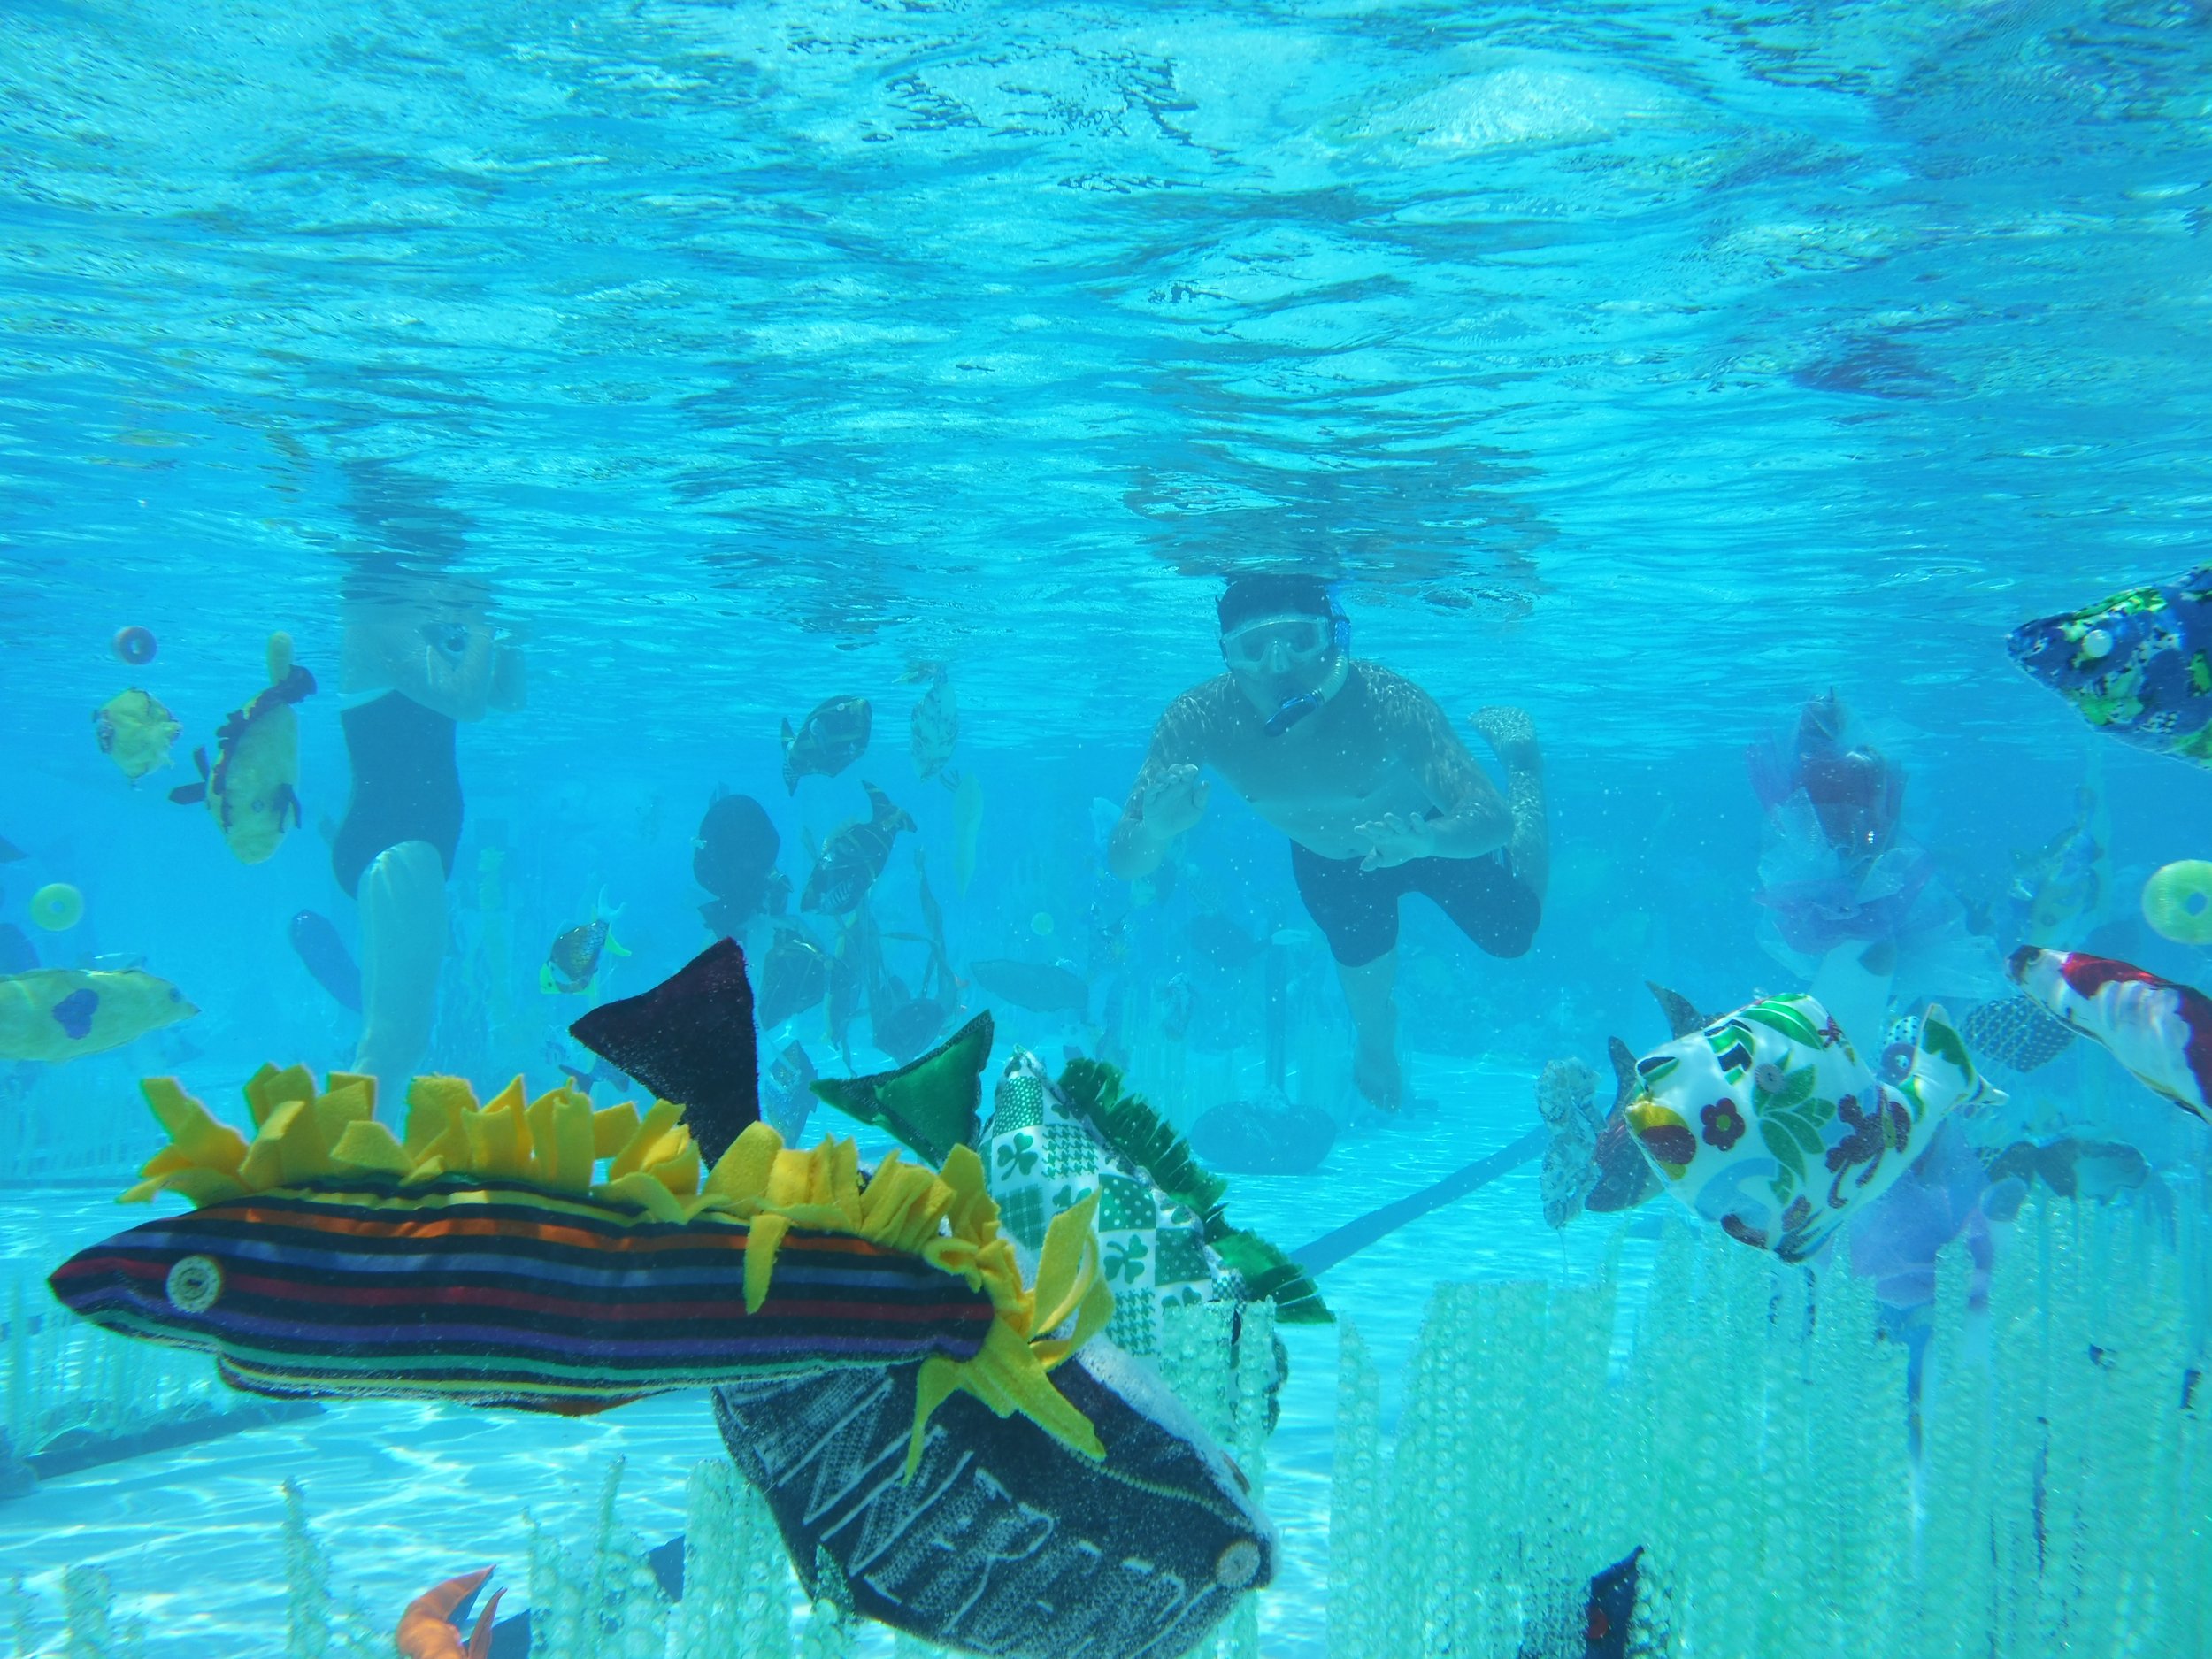 fish and snorkelers - Copy.JPG